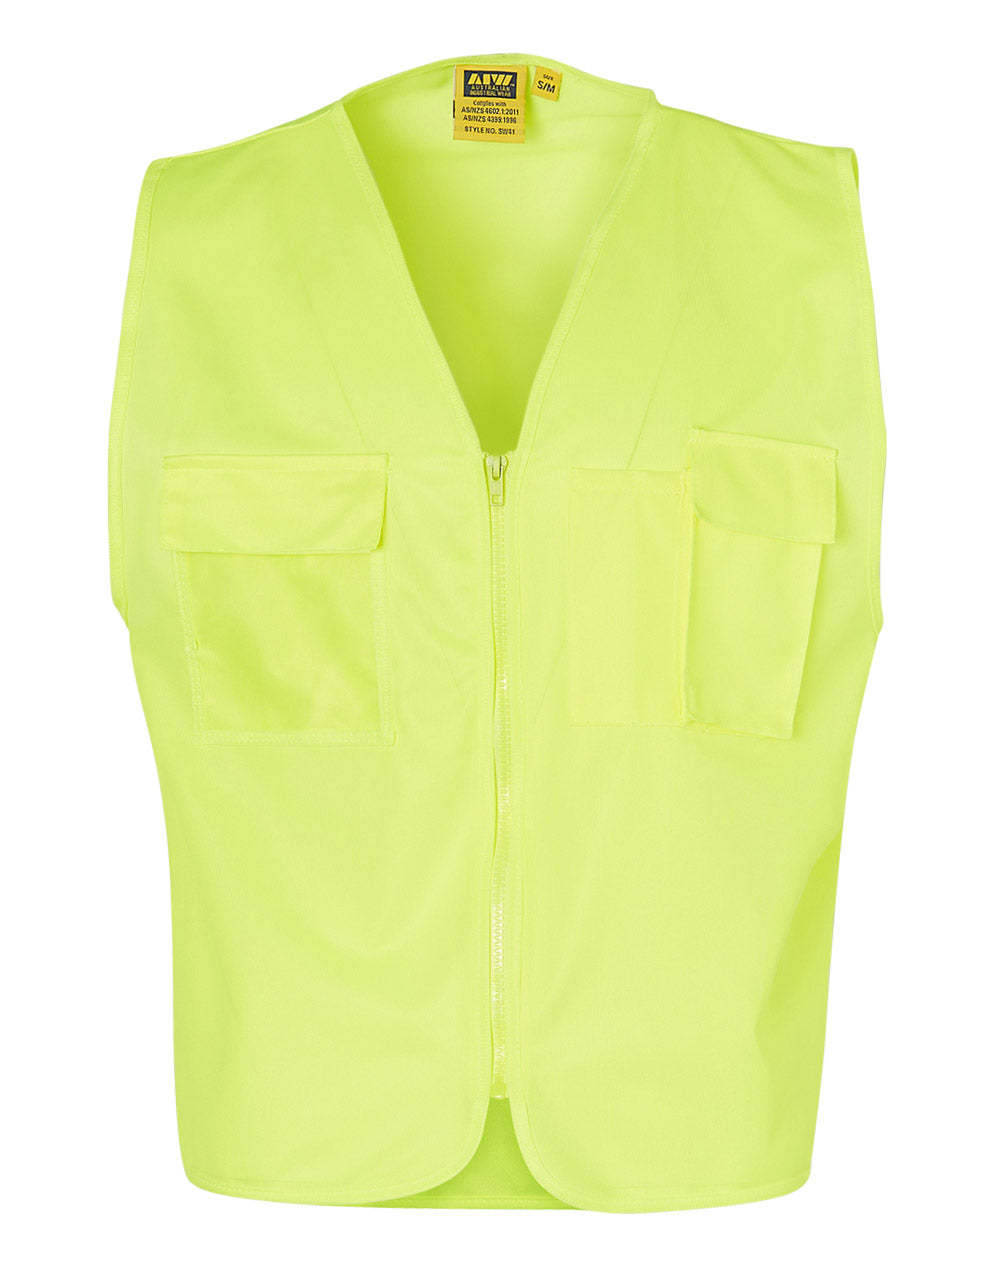 Hivis Safety Vest With Id Pkt - made by AIW